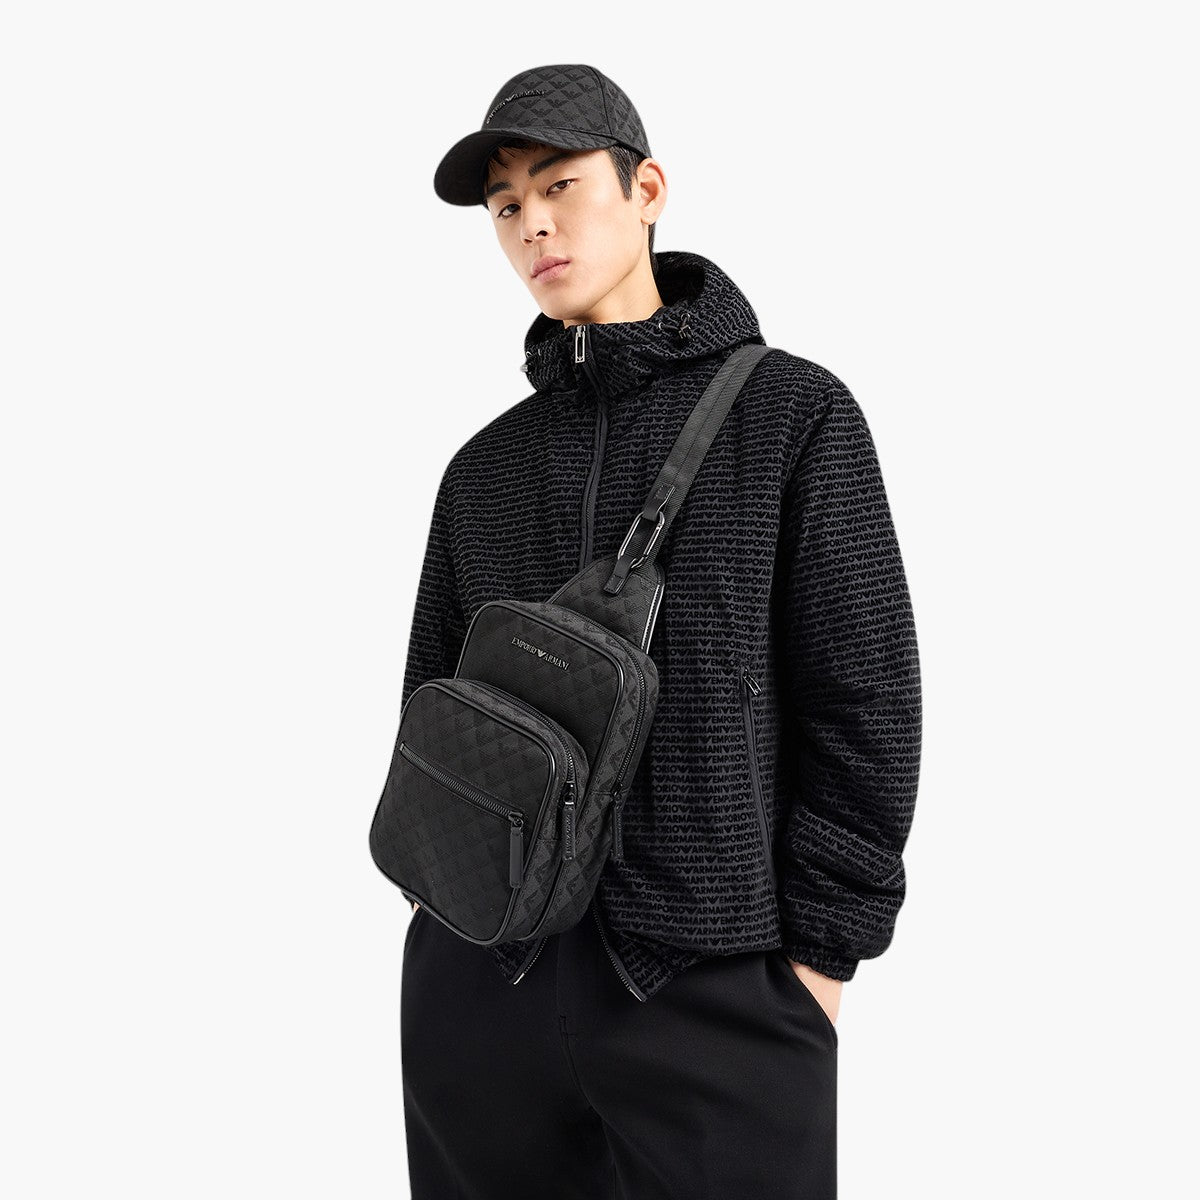 Emporio Armani One Shoulder Backpack With All-Over Jacquard Eagle | LEVISONS